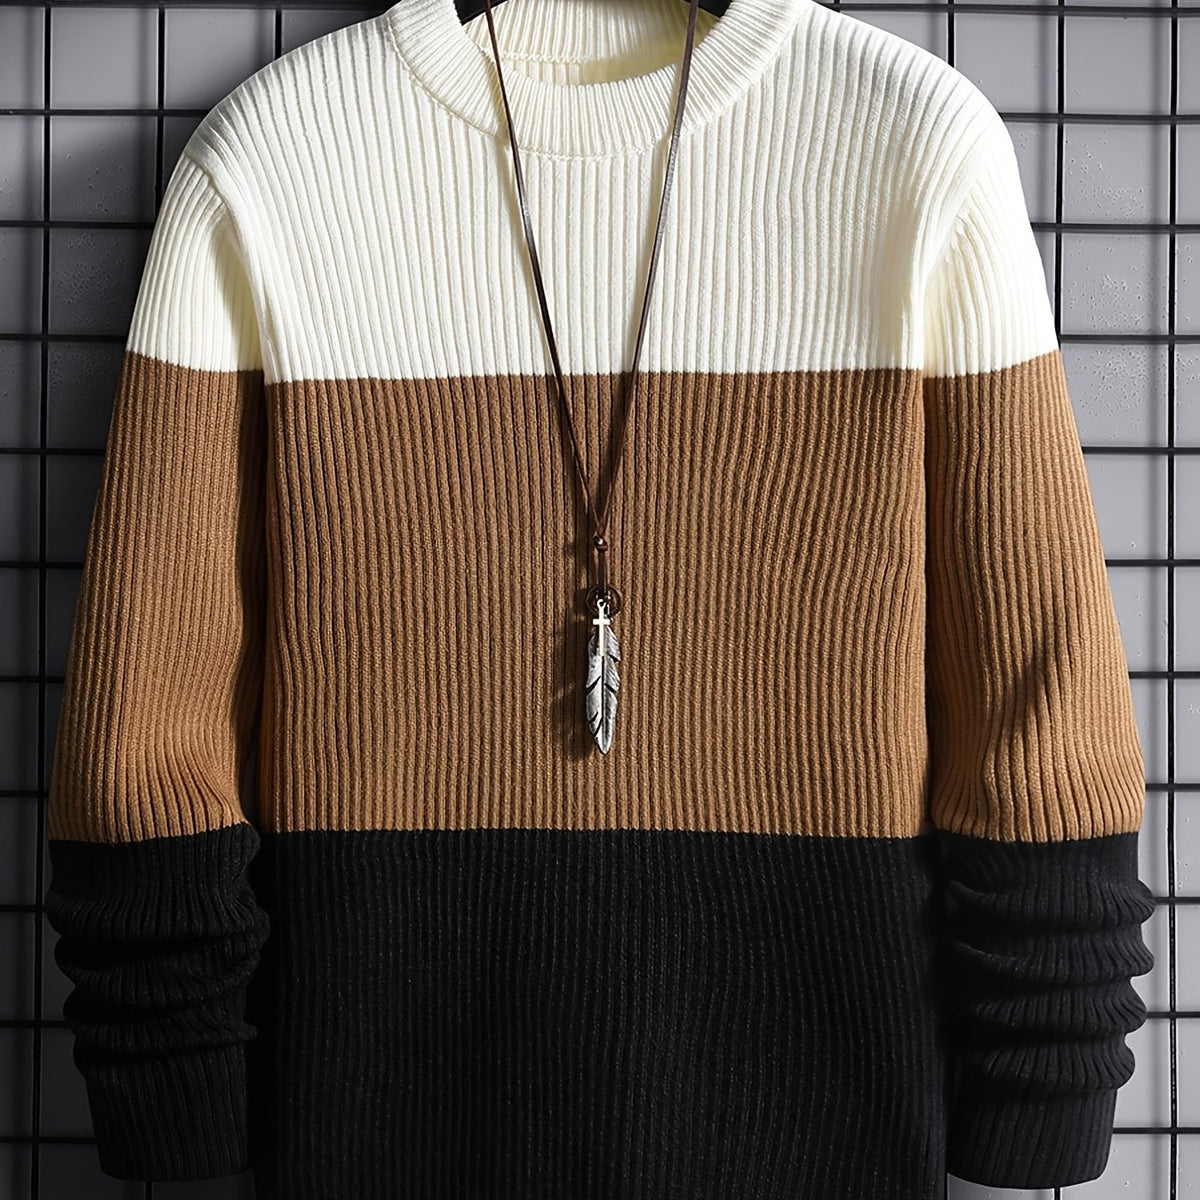 Stylish Men's Color Block Knit Sweater with Comfortable Crew Neck